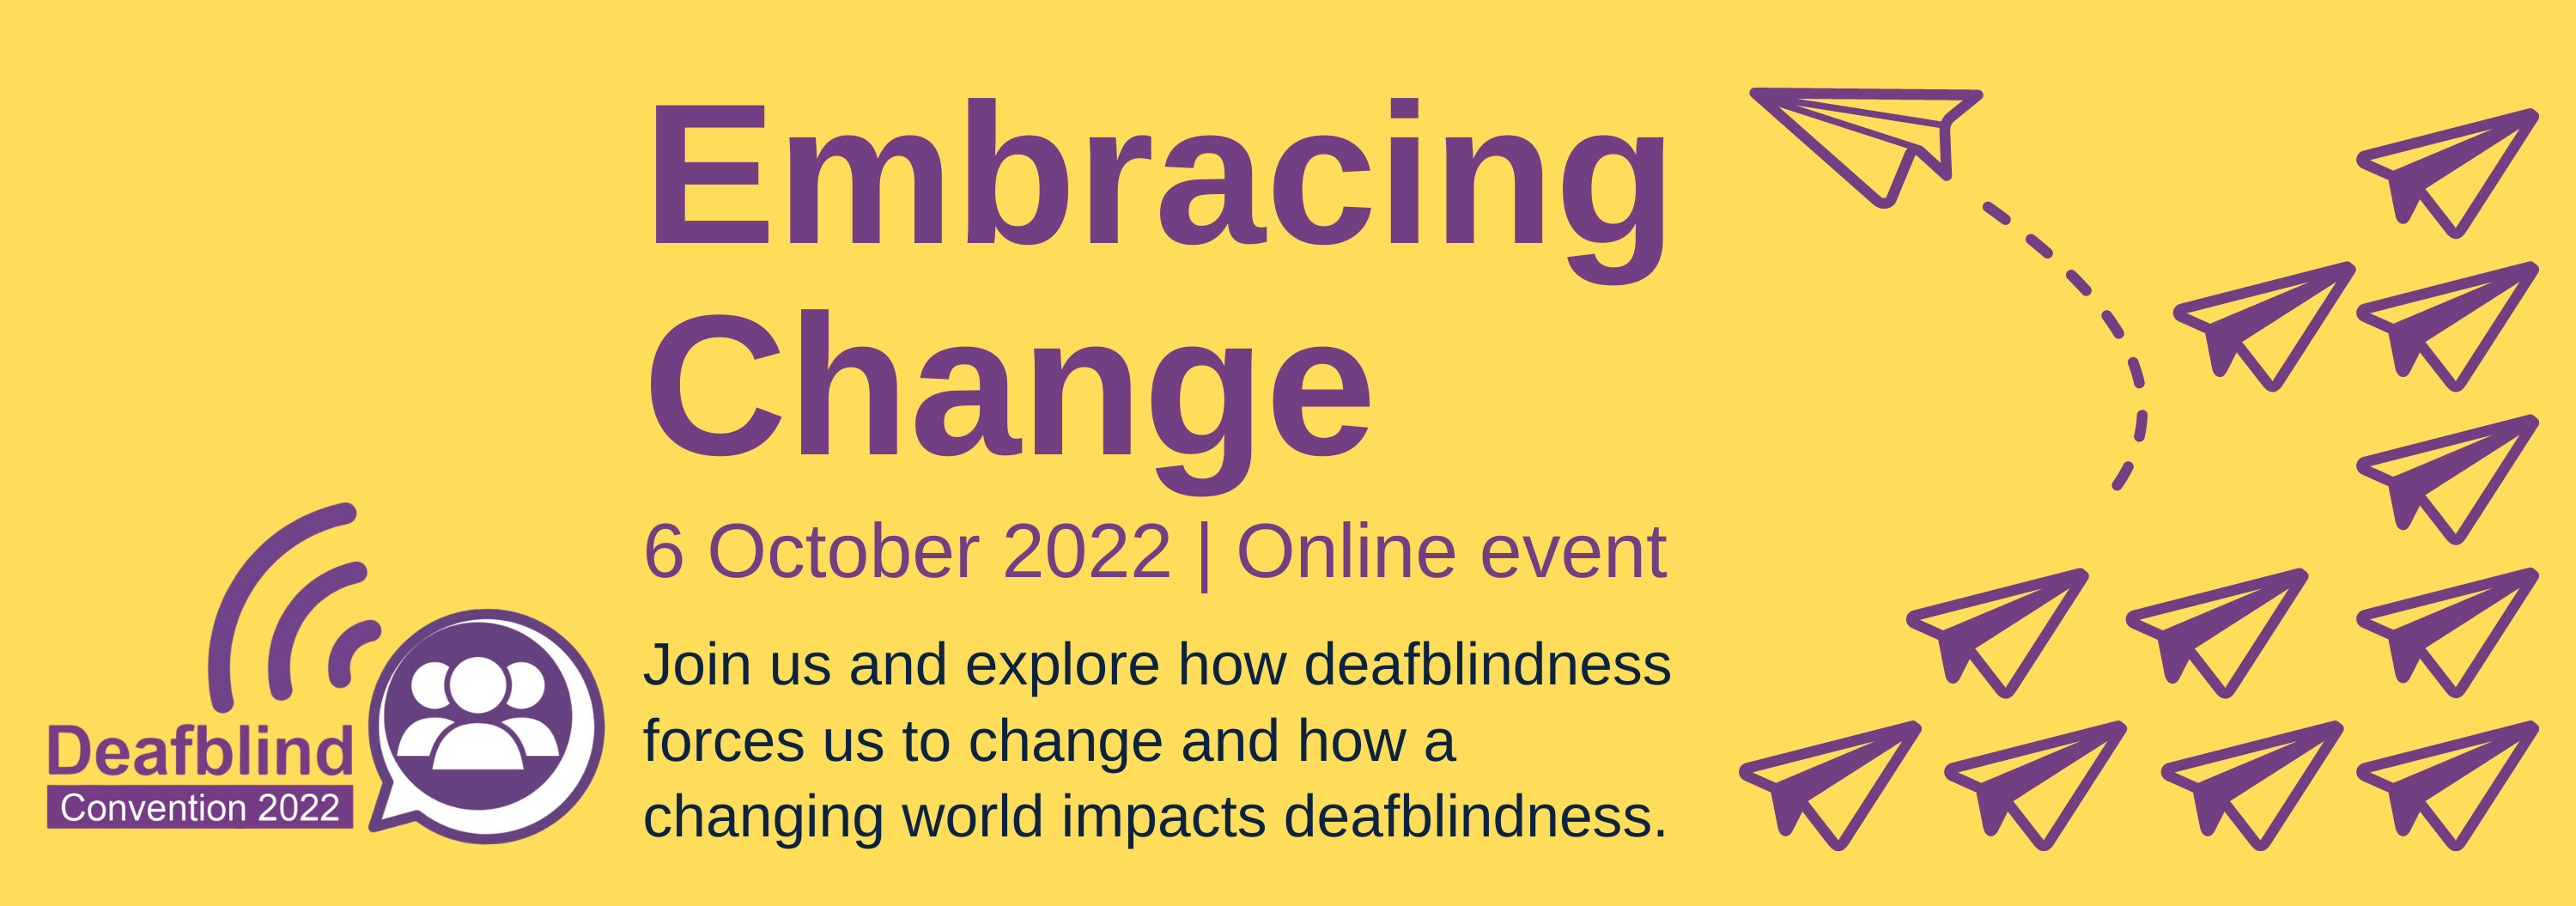 Graphic banner with a bright yellow background, with lineart style paper aeroplanes on the right hand side and the Deafblind Convention logo on the left hand side. Text reads 'Embracing change, 6 October 2022, Online event. Join us and explore how deafblindness forces us to change and how a changing world impacts deafblindness.'